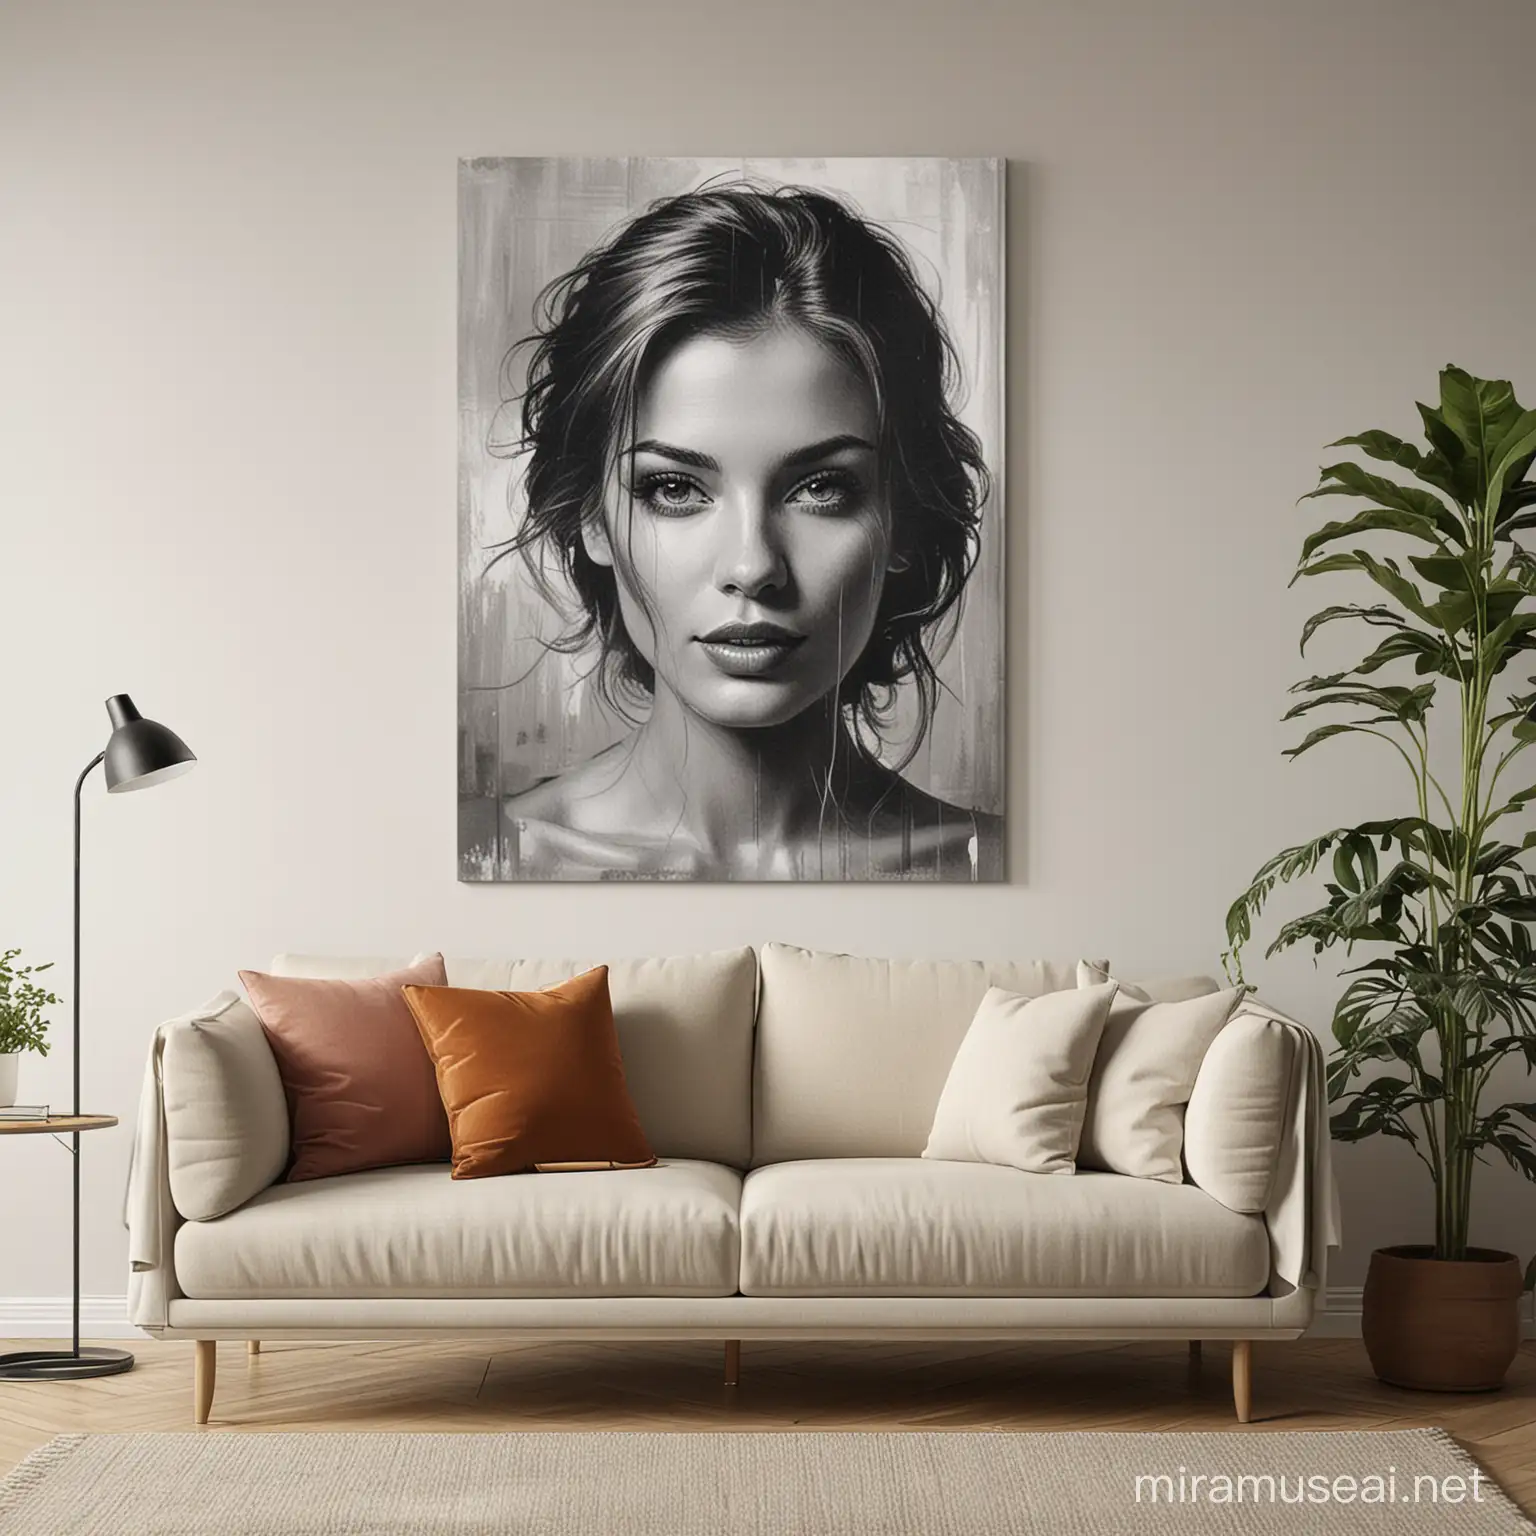 Wall art in a living room